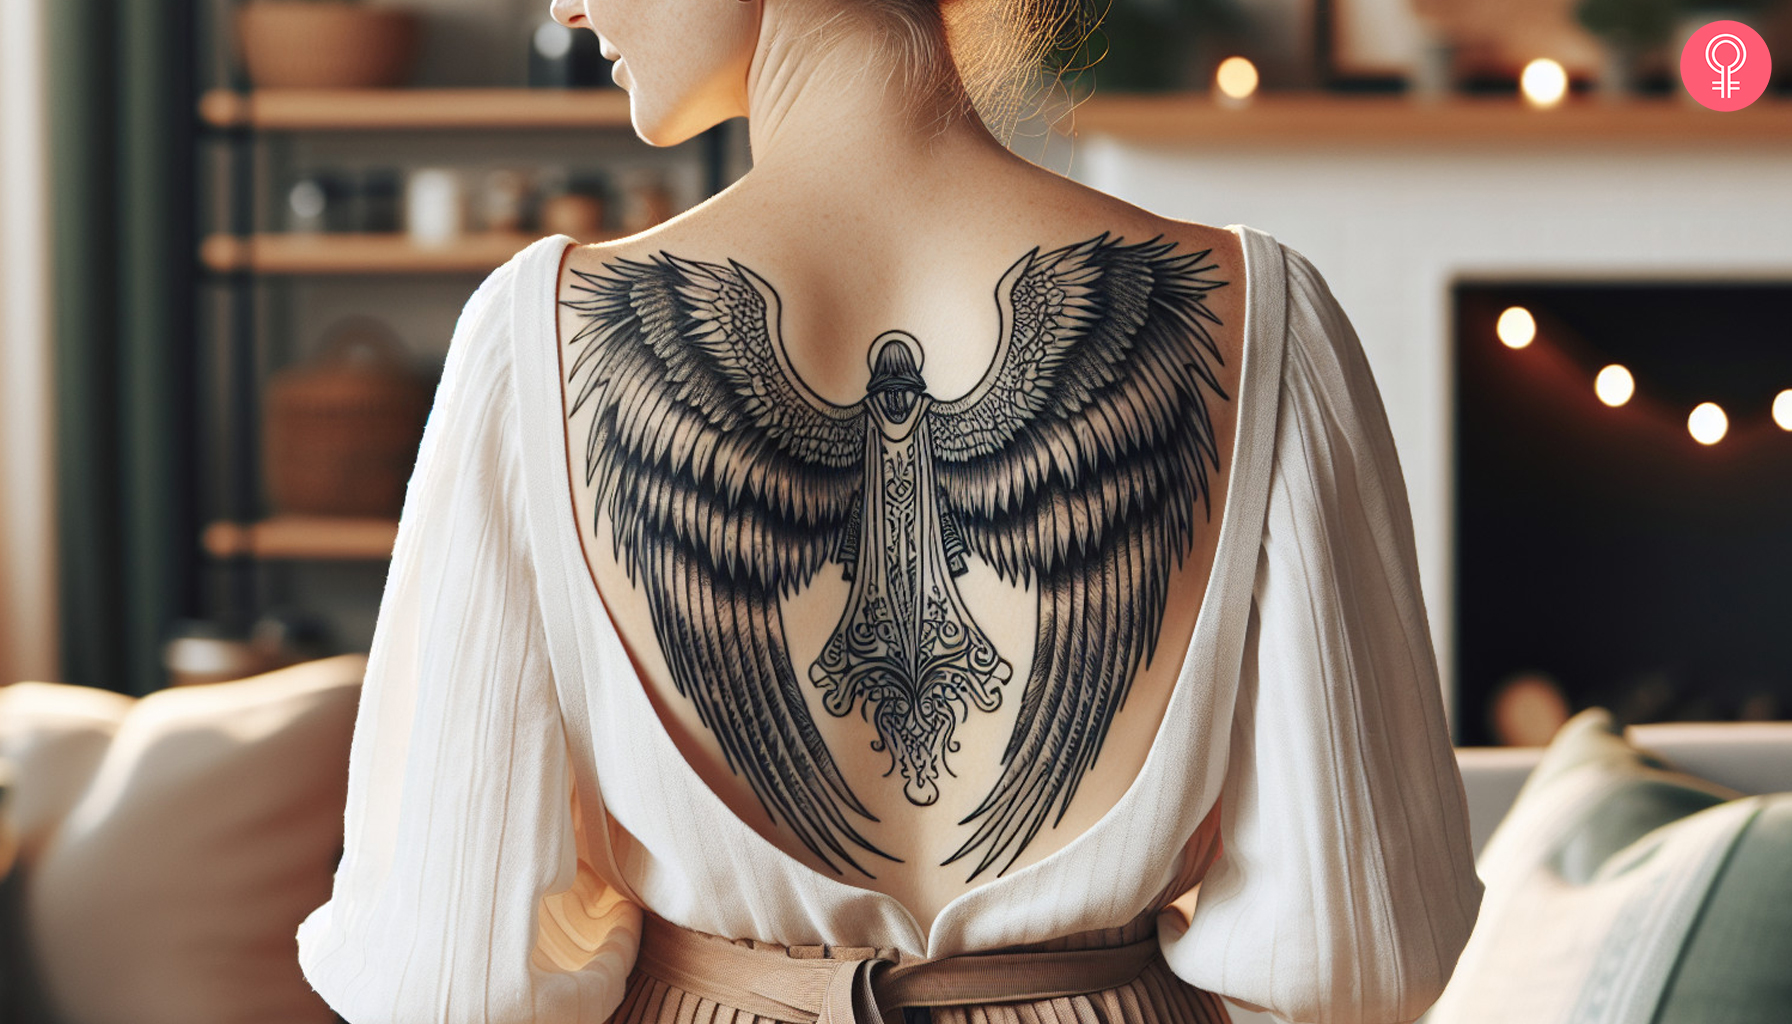 An angel of death tattoo on the back